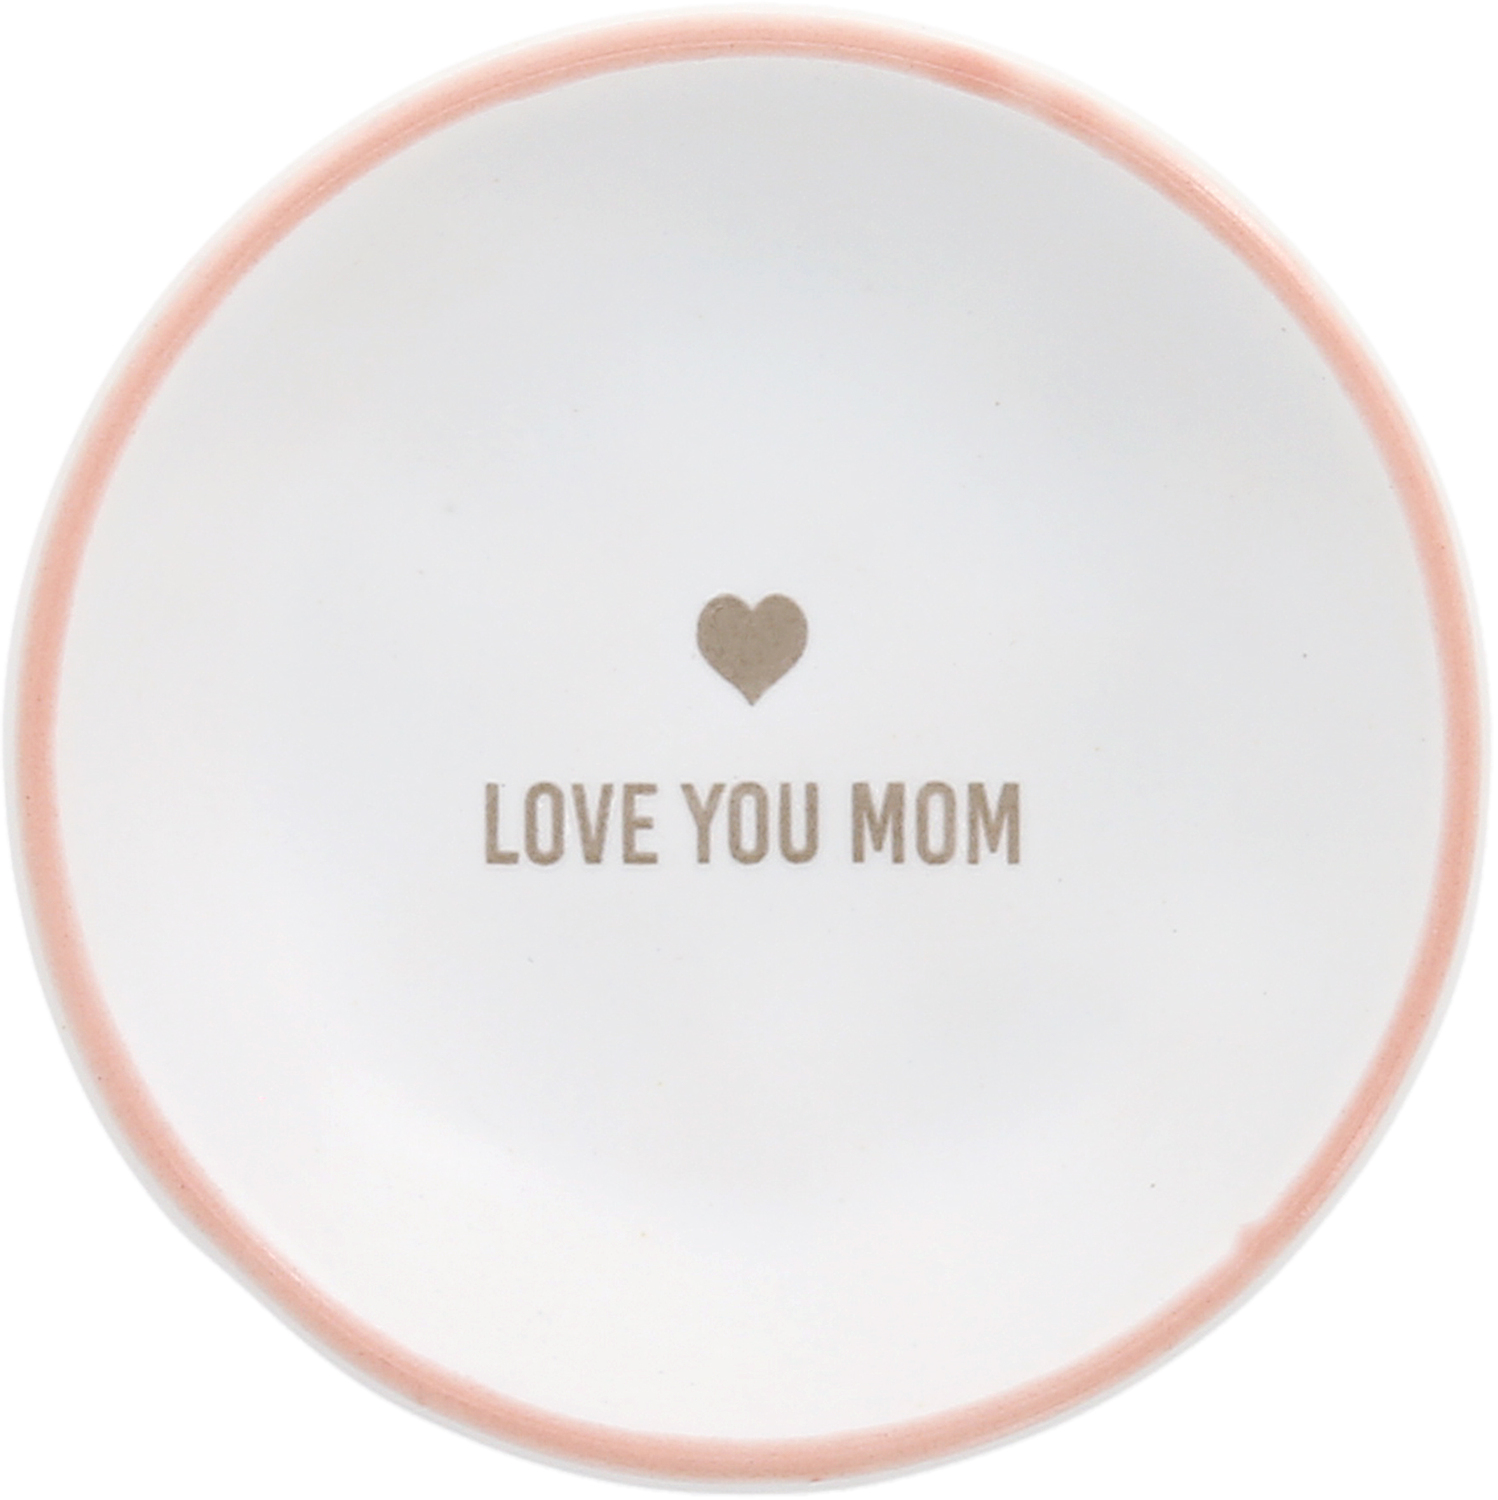 Love You Mom by Love You - Love You Mom - 2.5" Trinket Dish